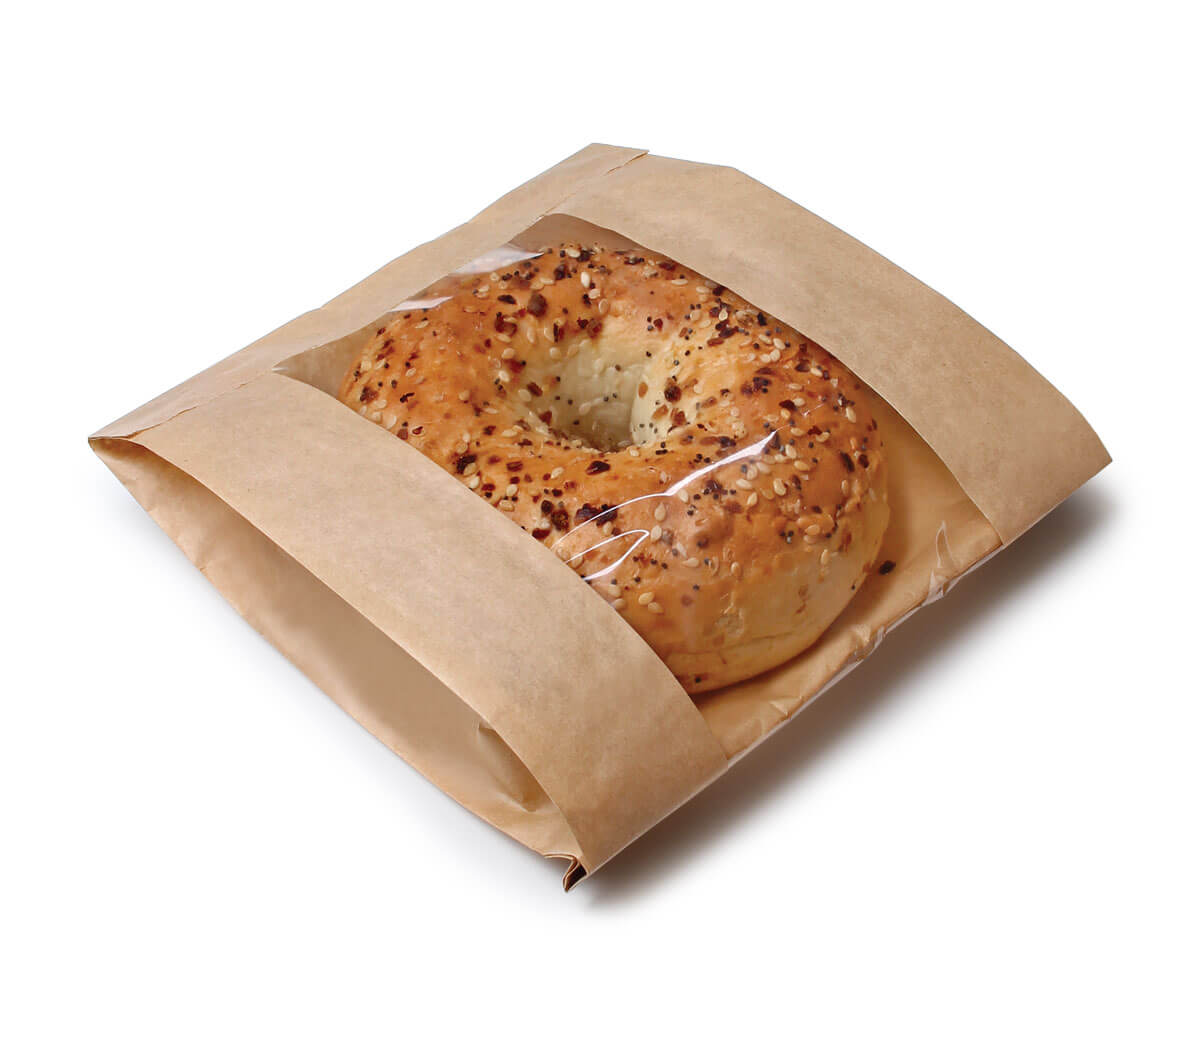 If You Care Unbleached Paper Roasting 1 x 6 Bags, 21.8 x 15 x 3.2 cm